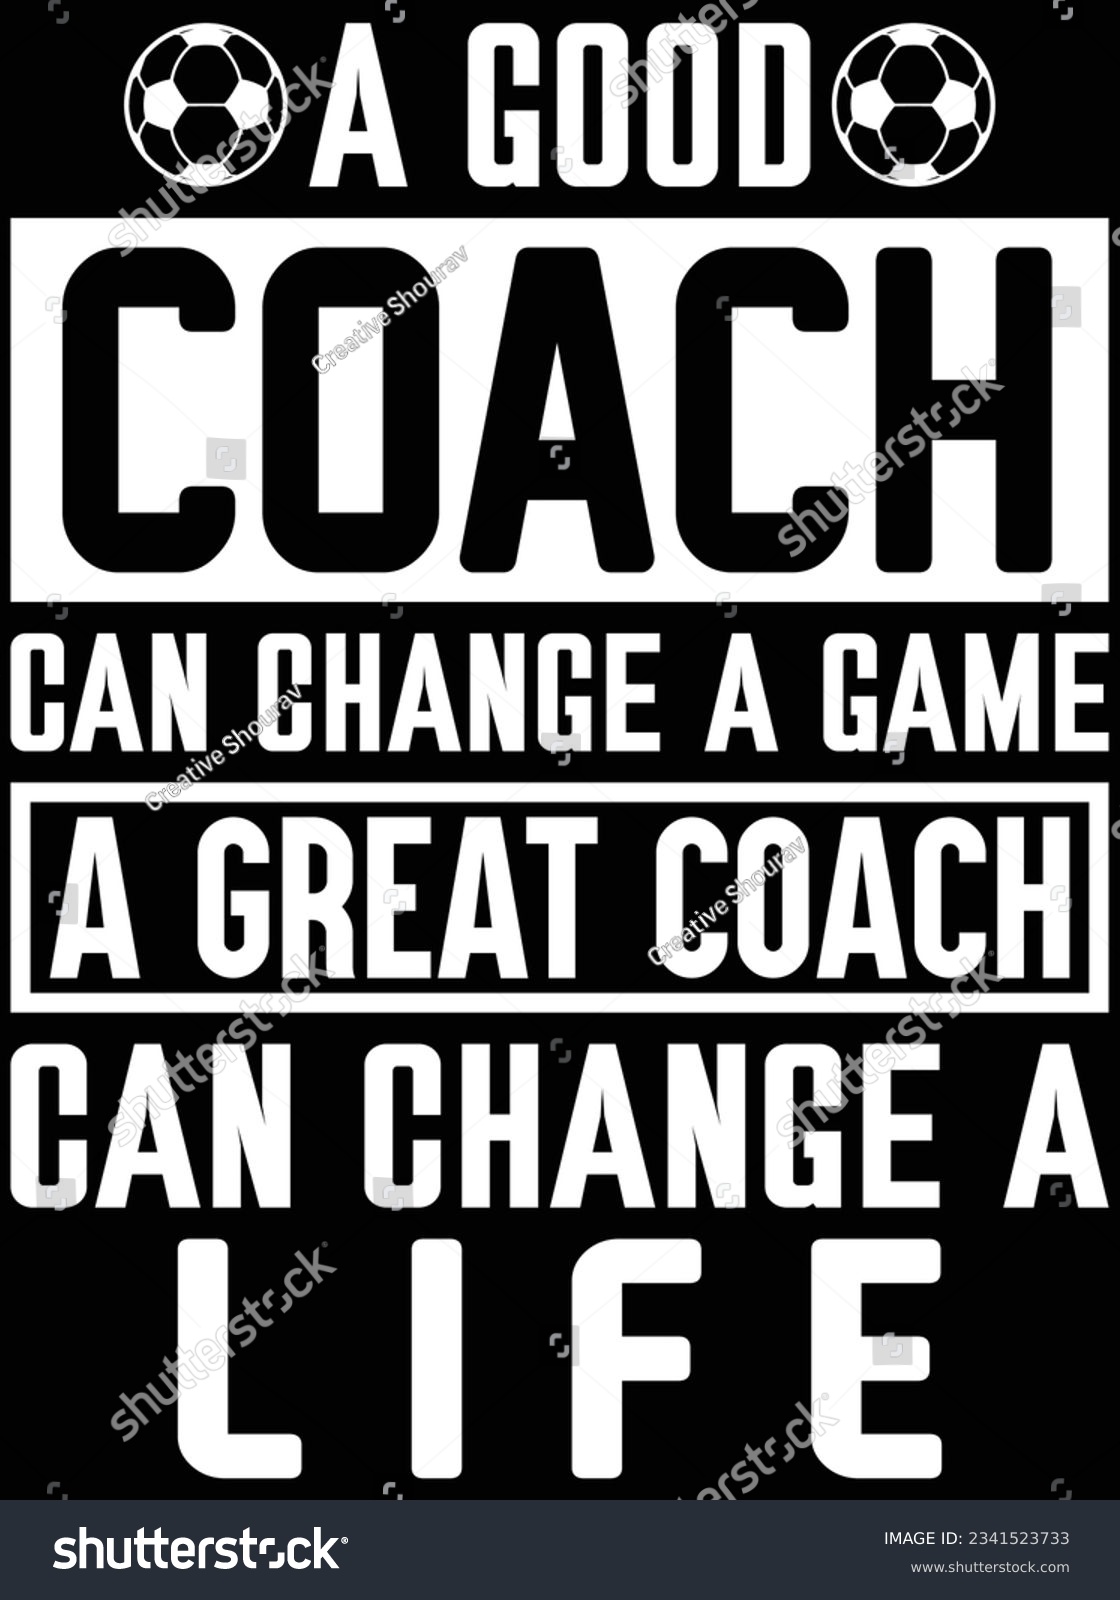 SVG of A good coach can change a game a great coach can change a life vector art design, eps file. design file for t-shirt. SVG, EPS cuttable design file svg